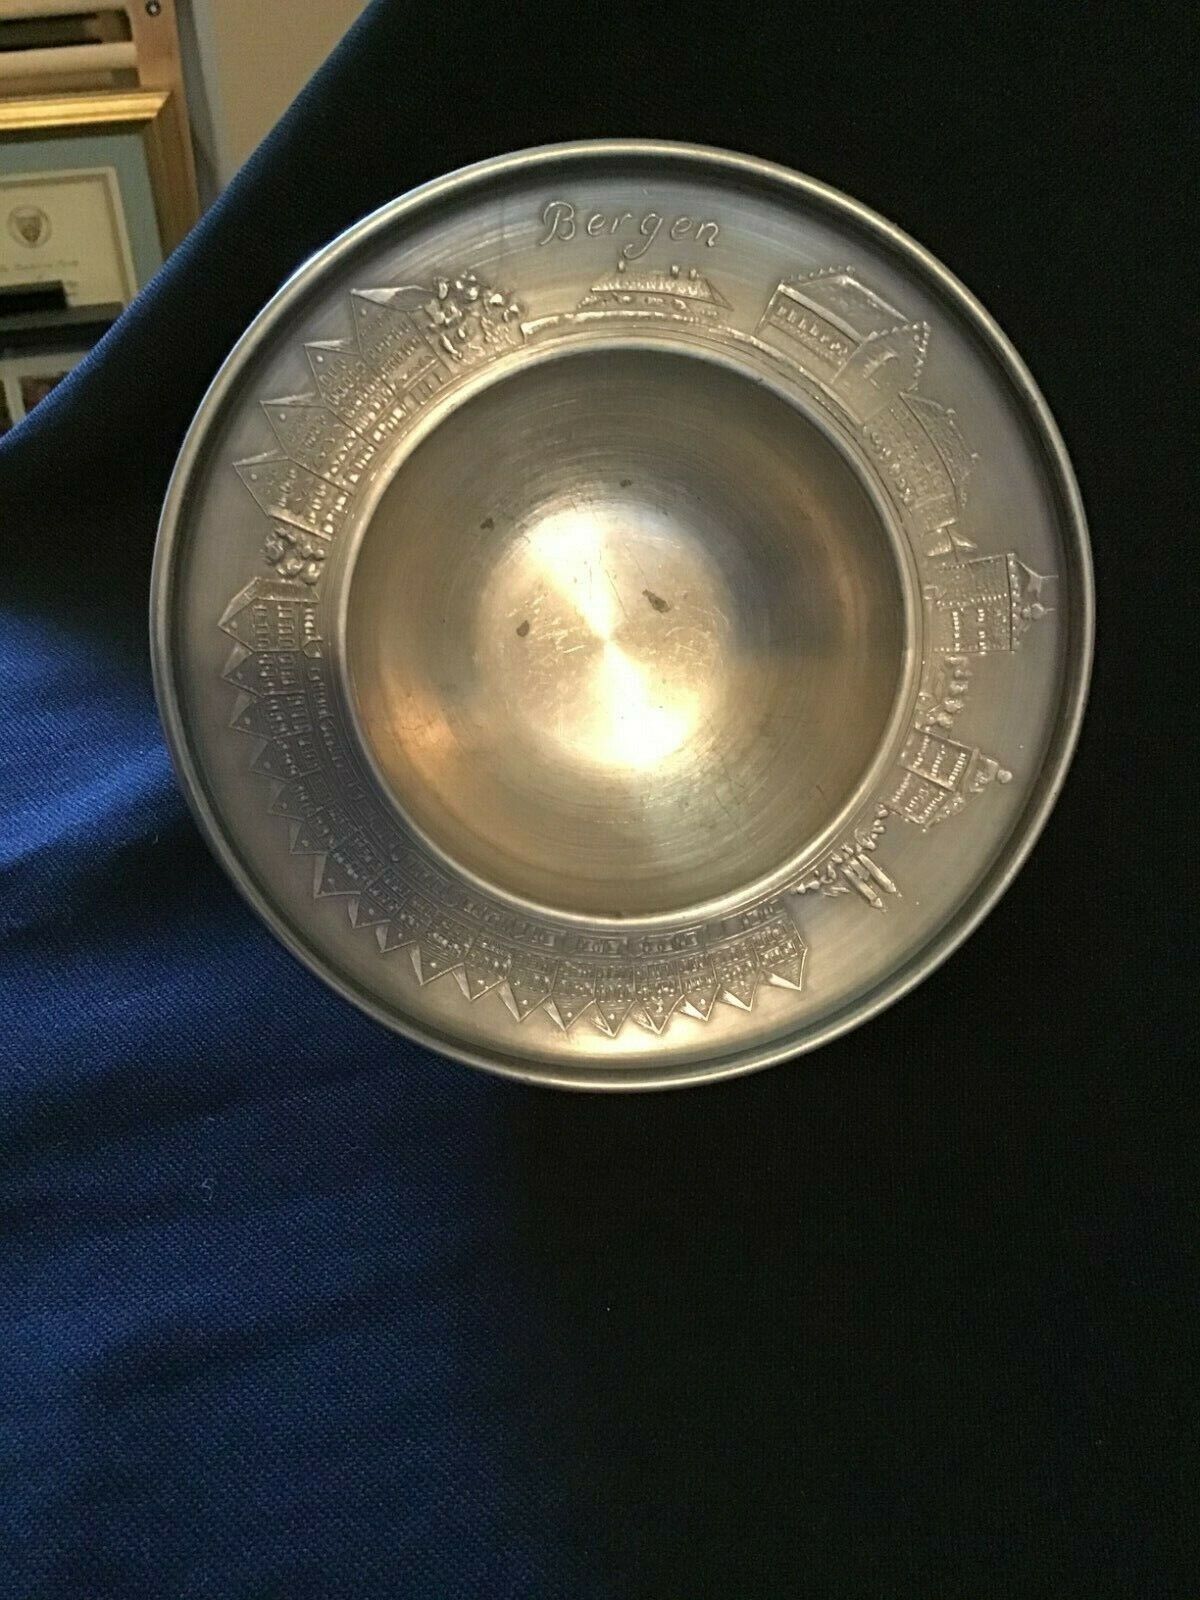 Vintage Vesttinn Pewter bowl - Made in Norway - Collectible - Great Condition